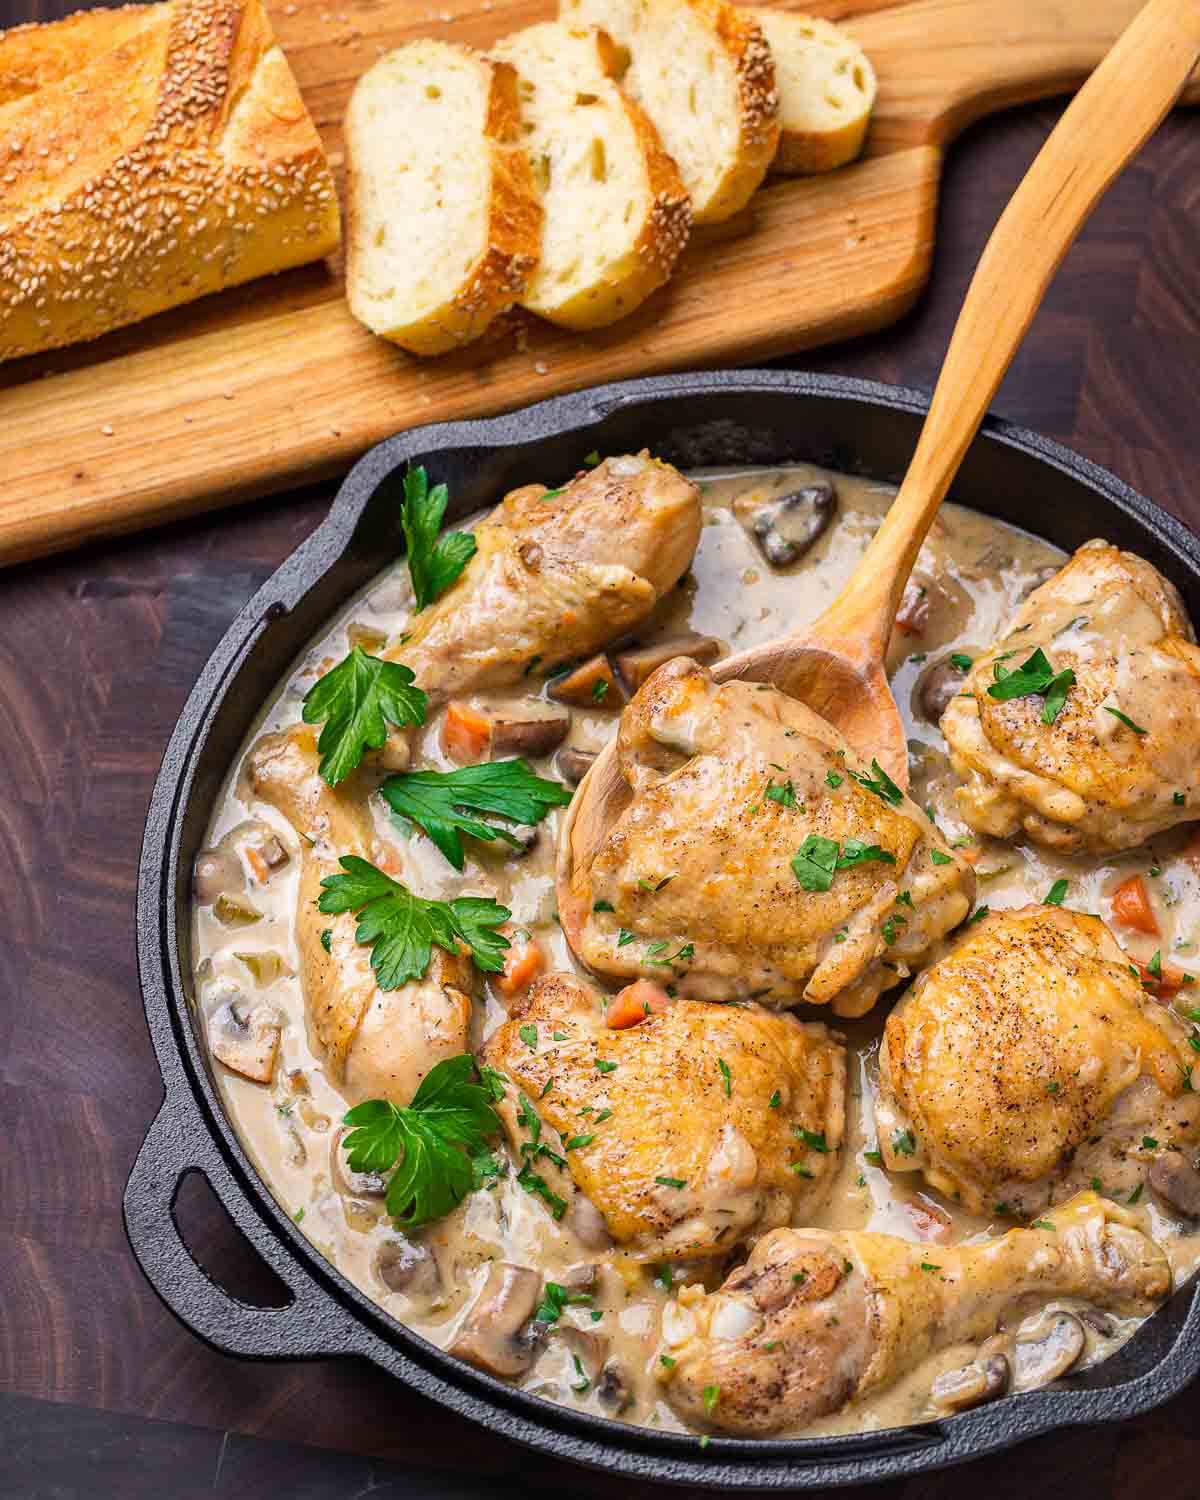 Chicken fricassee in cast iron pan and loaf of cut Italian bread.